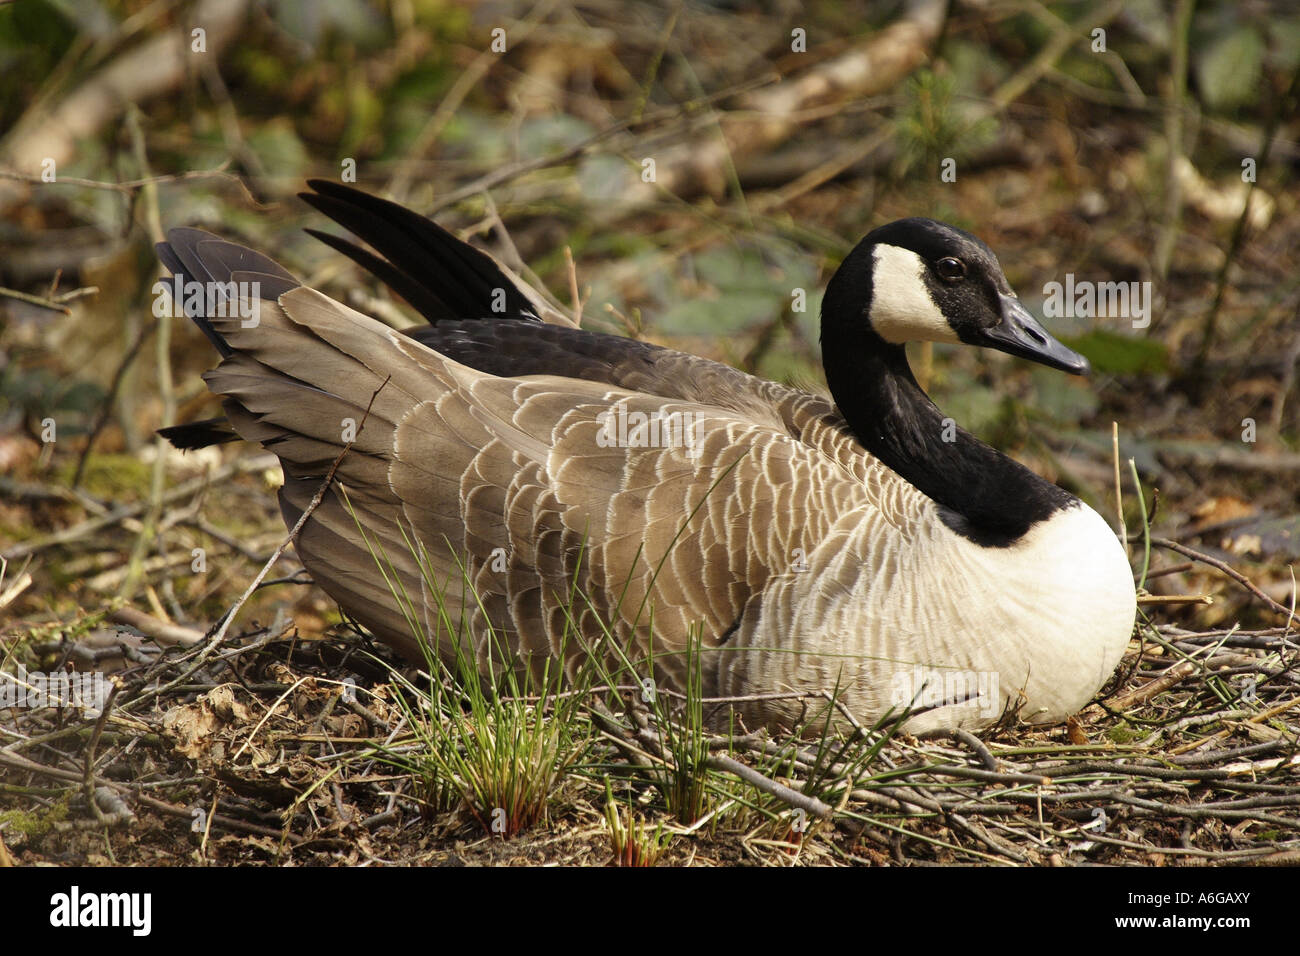 Canada Goose (Branta canadensis) in its nest Stock Photo